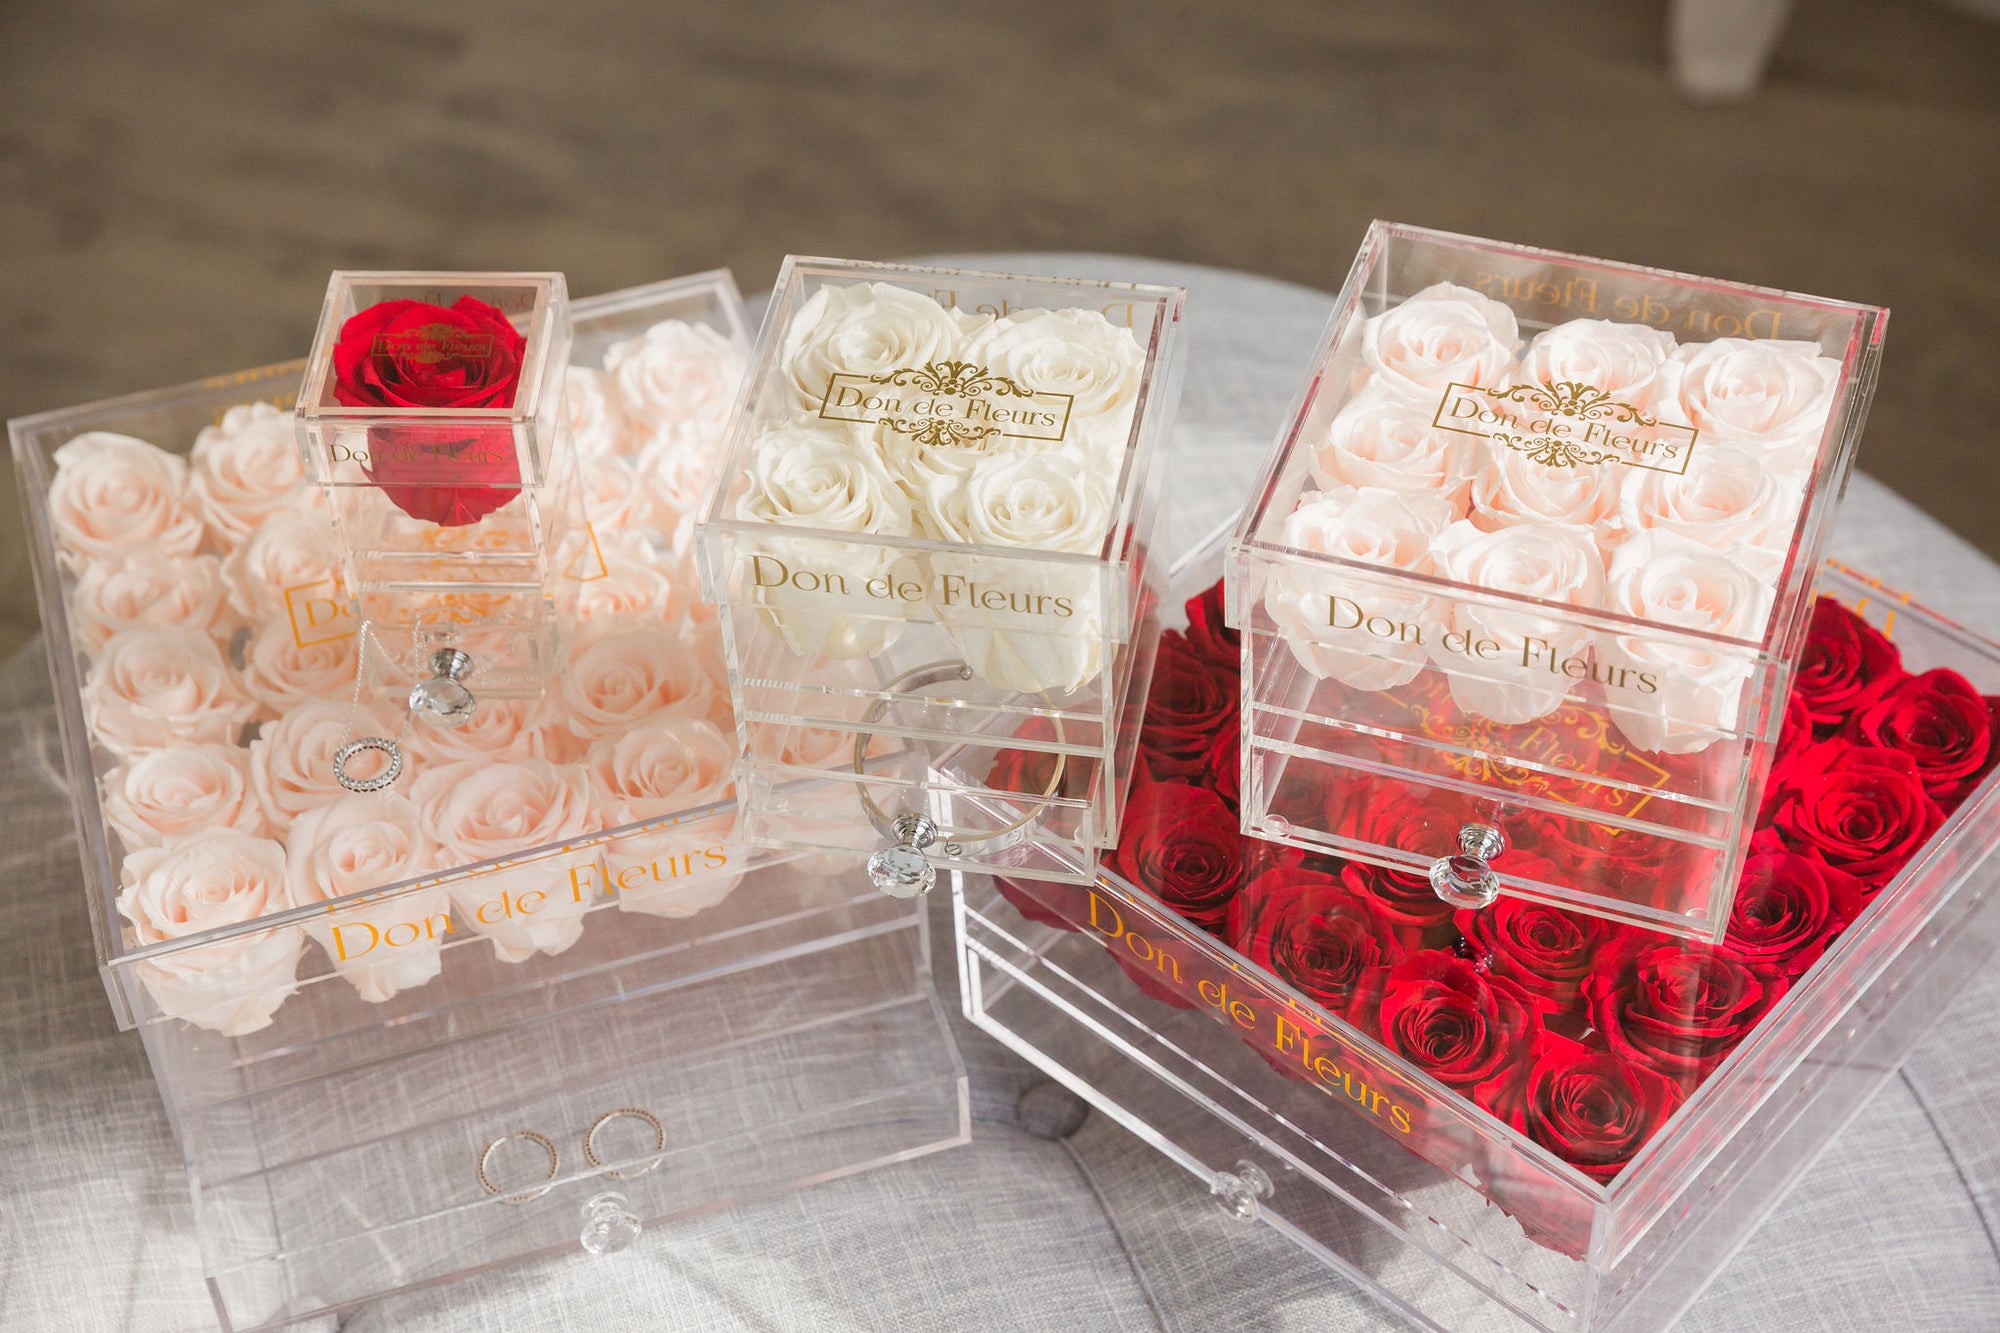 New Preserved Rose Products Coming Soon!